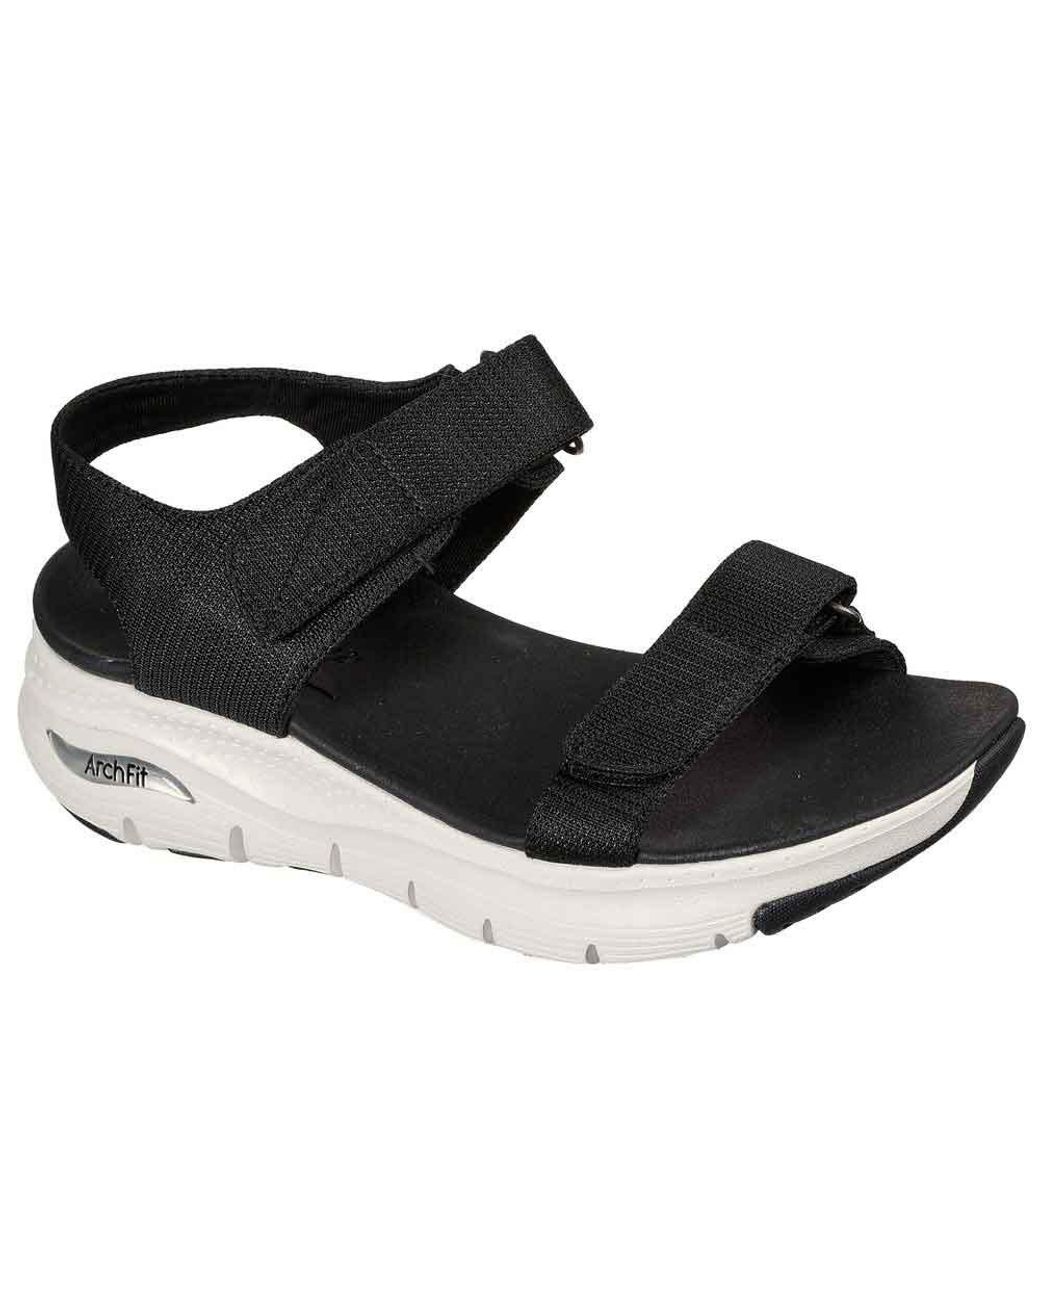 Skechers Arch Fit - Touristy Sandals in Black | Lyst